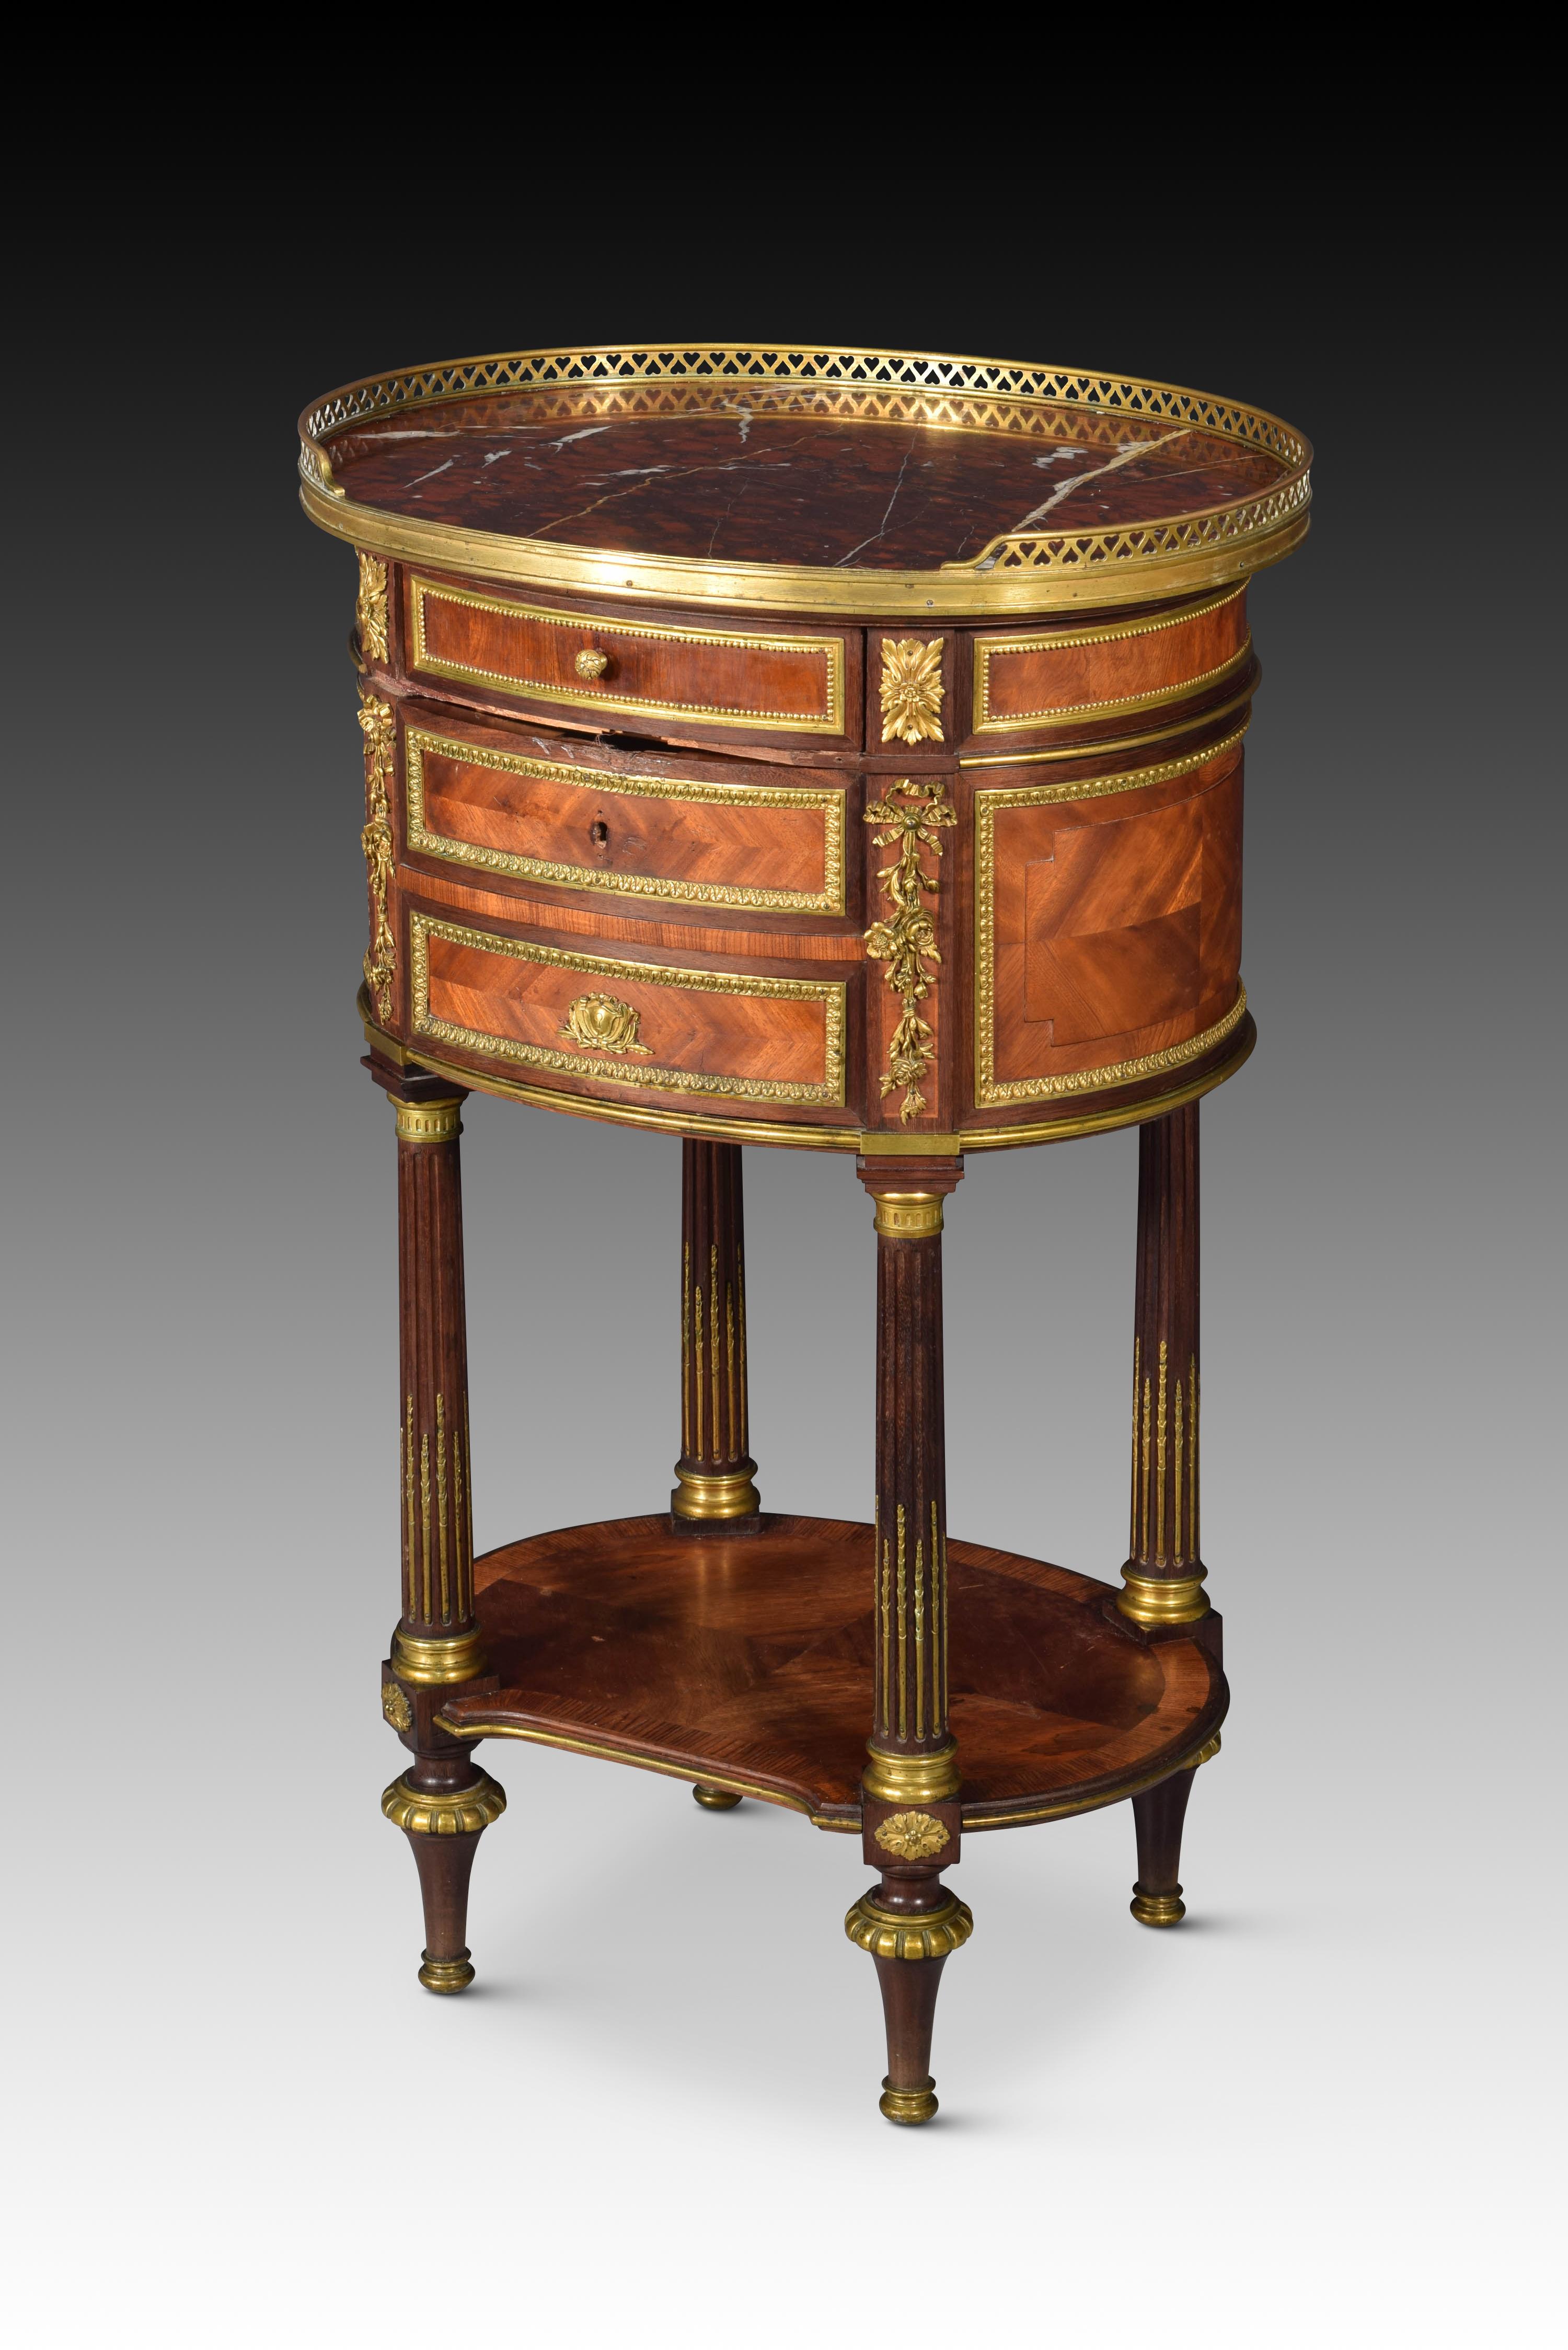 Bedside table. Woods (mahogany...), bronze, marble. QUIGNON FILS. Paris, France, towards the last third of the 19th century. 
Signed in the lower area of the drawer body. It has a break. 
Nightstand or side table with four truncated conical legs and